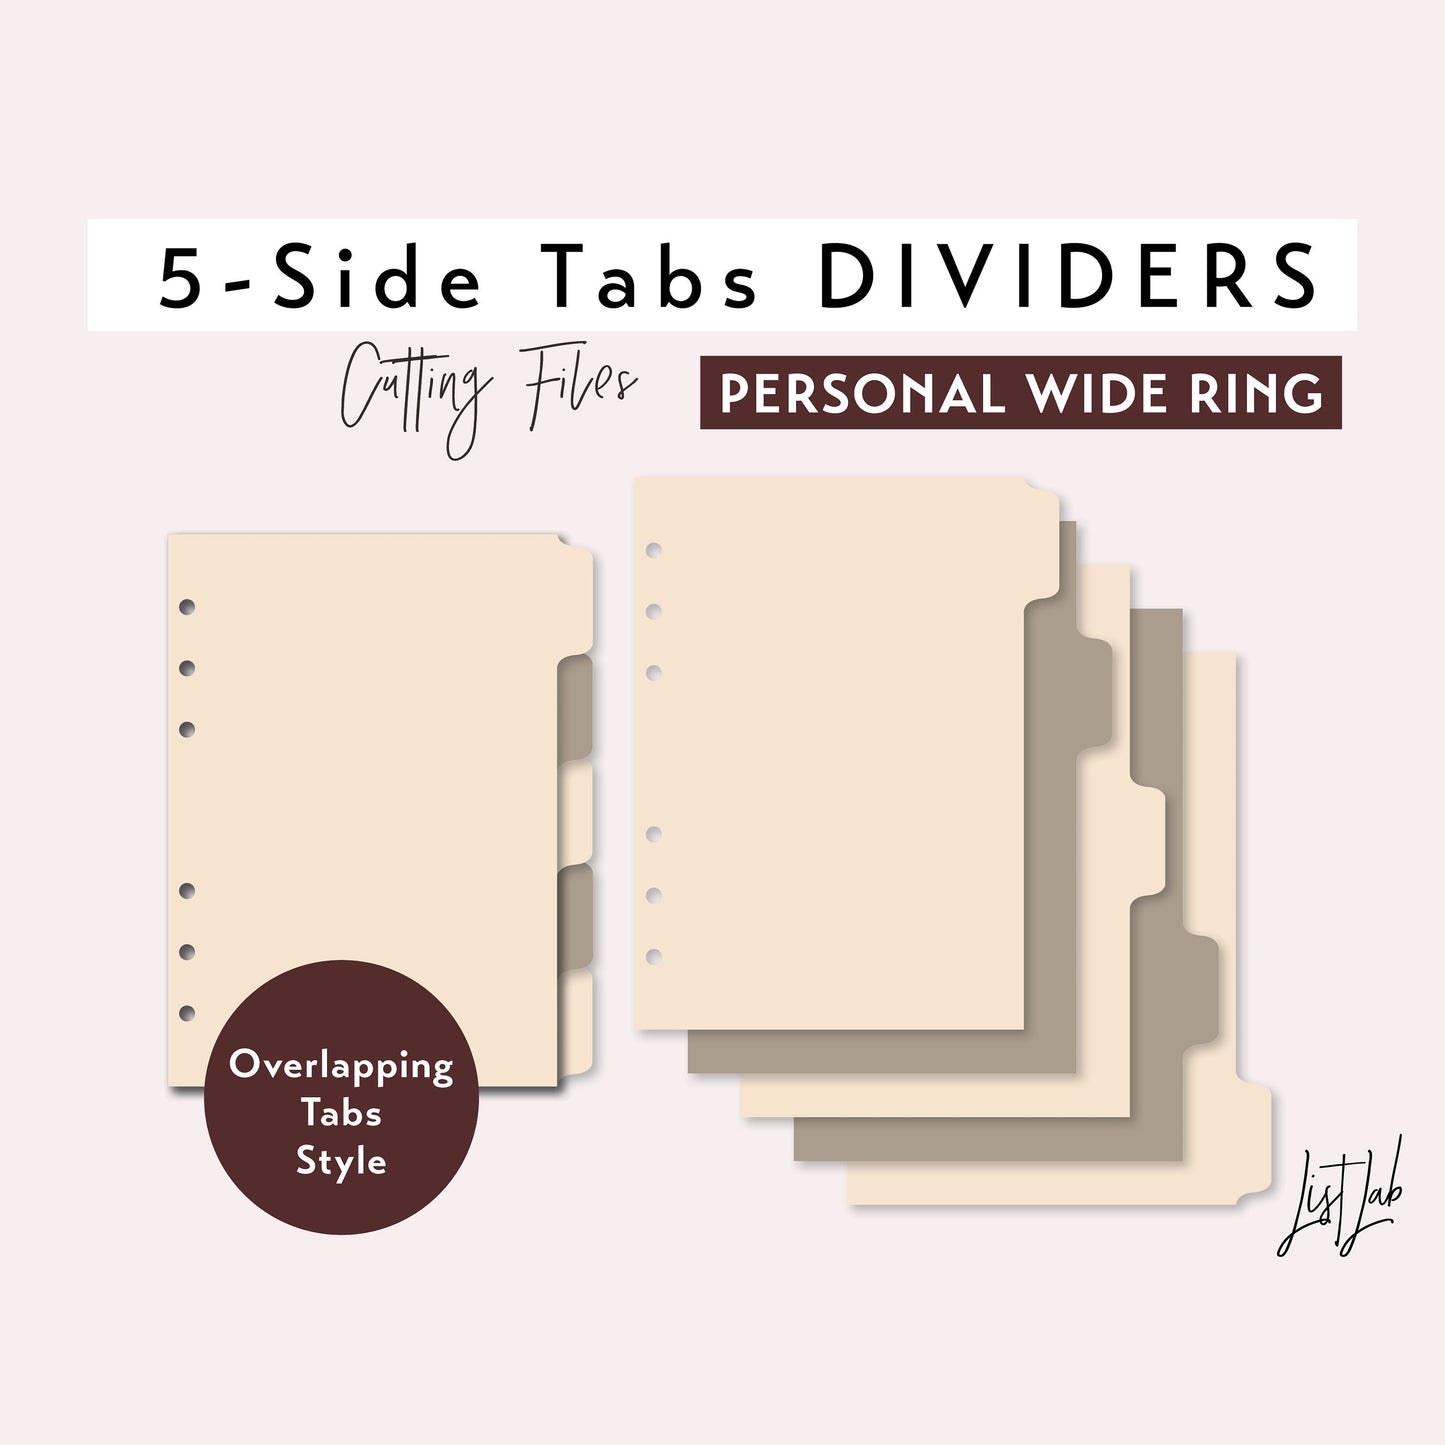 Personal Wide Ring size 5-SIDE Tab Dividers Cutting Files Set